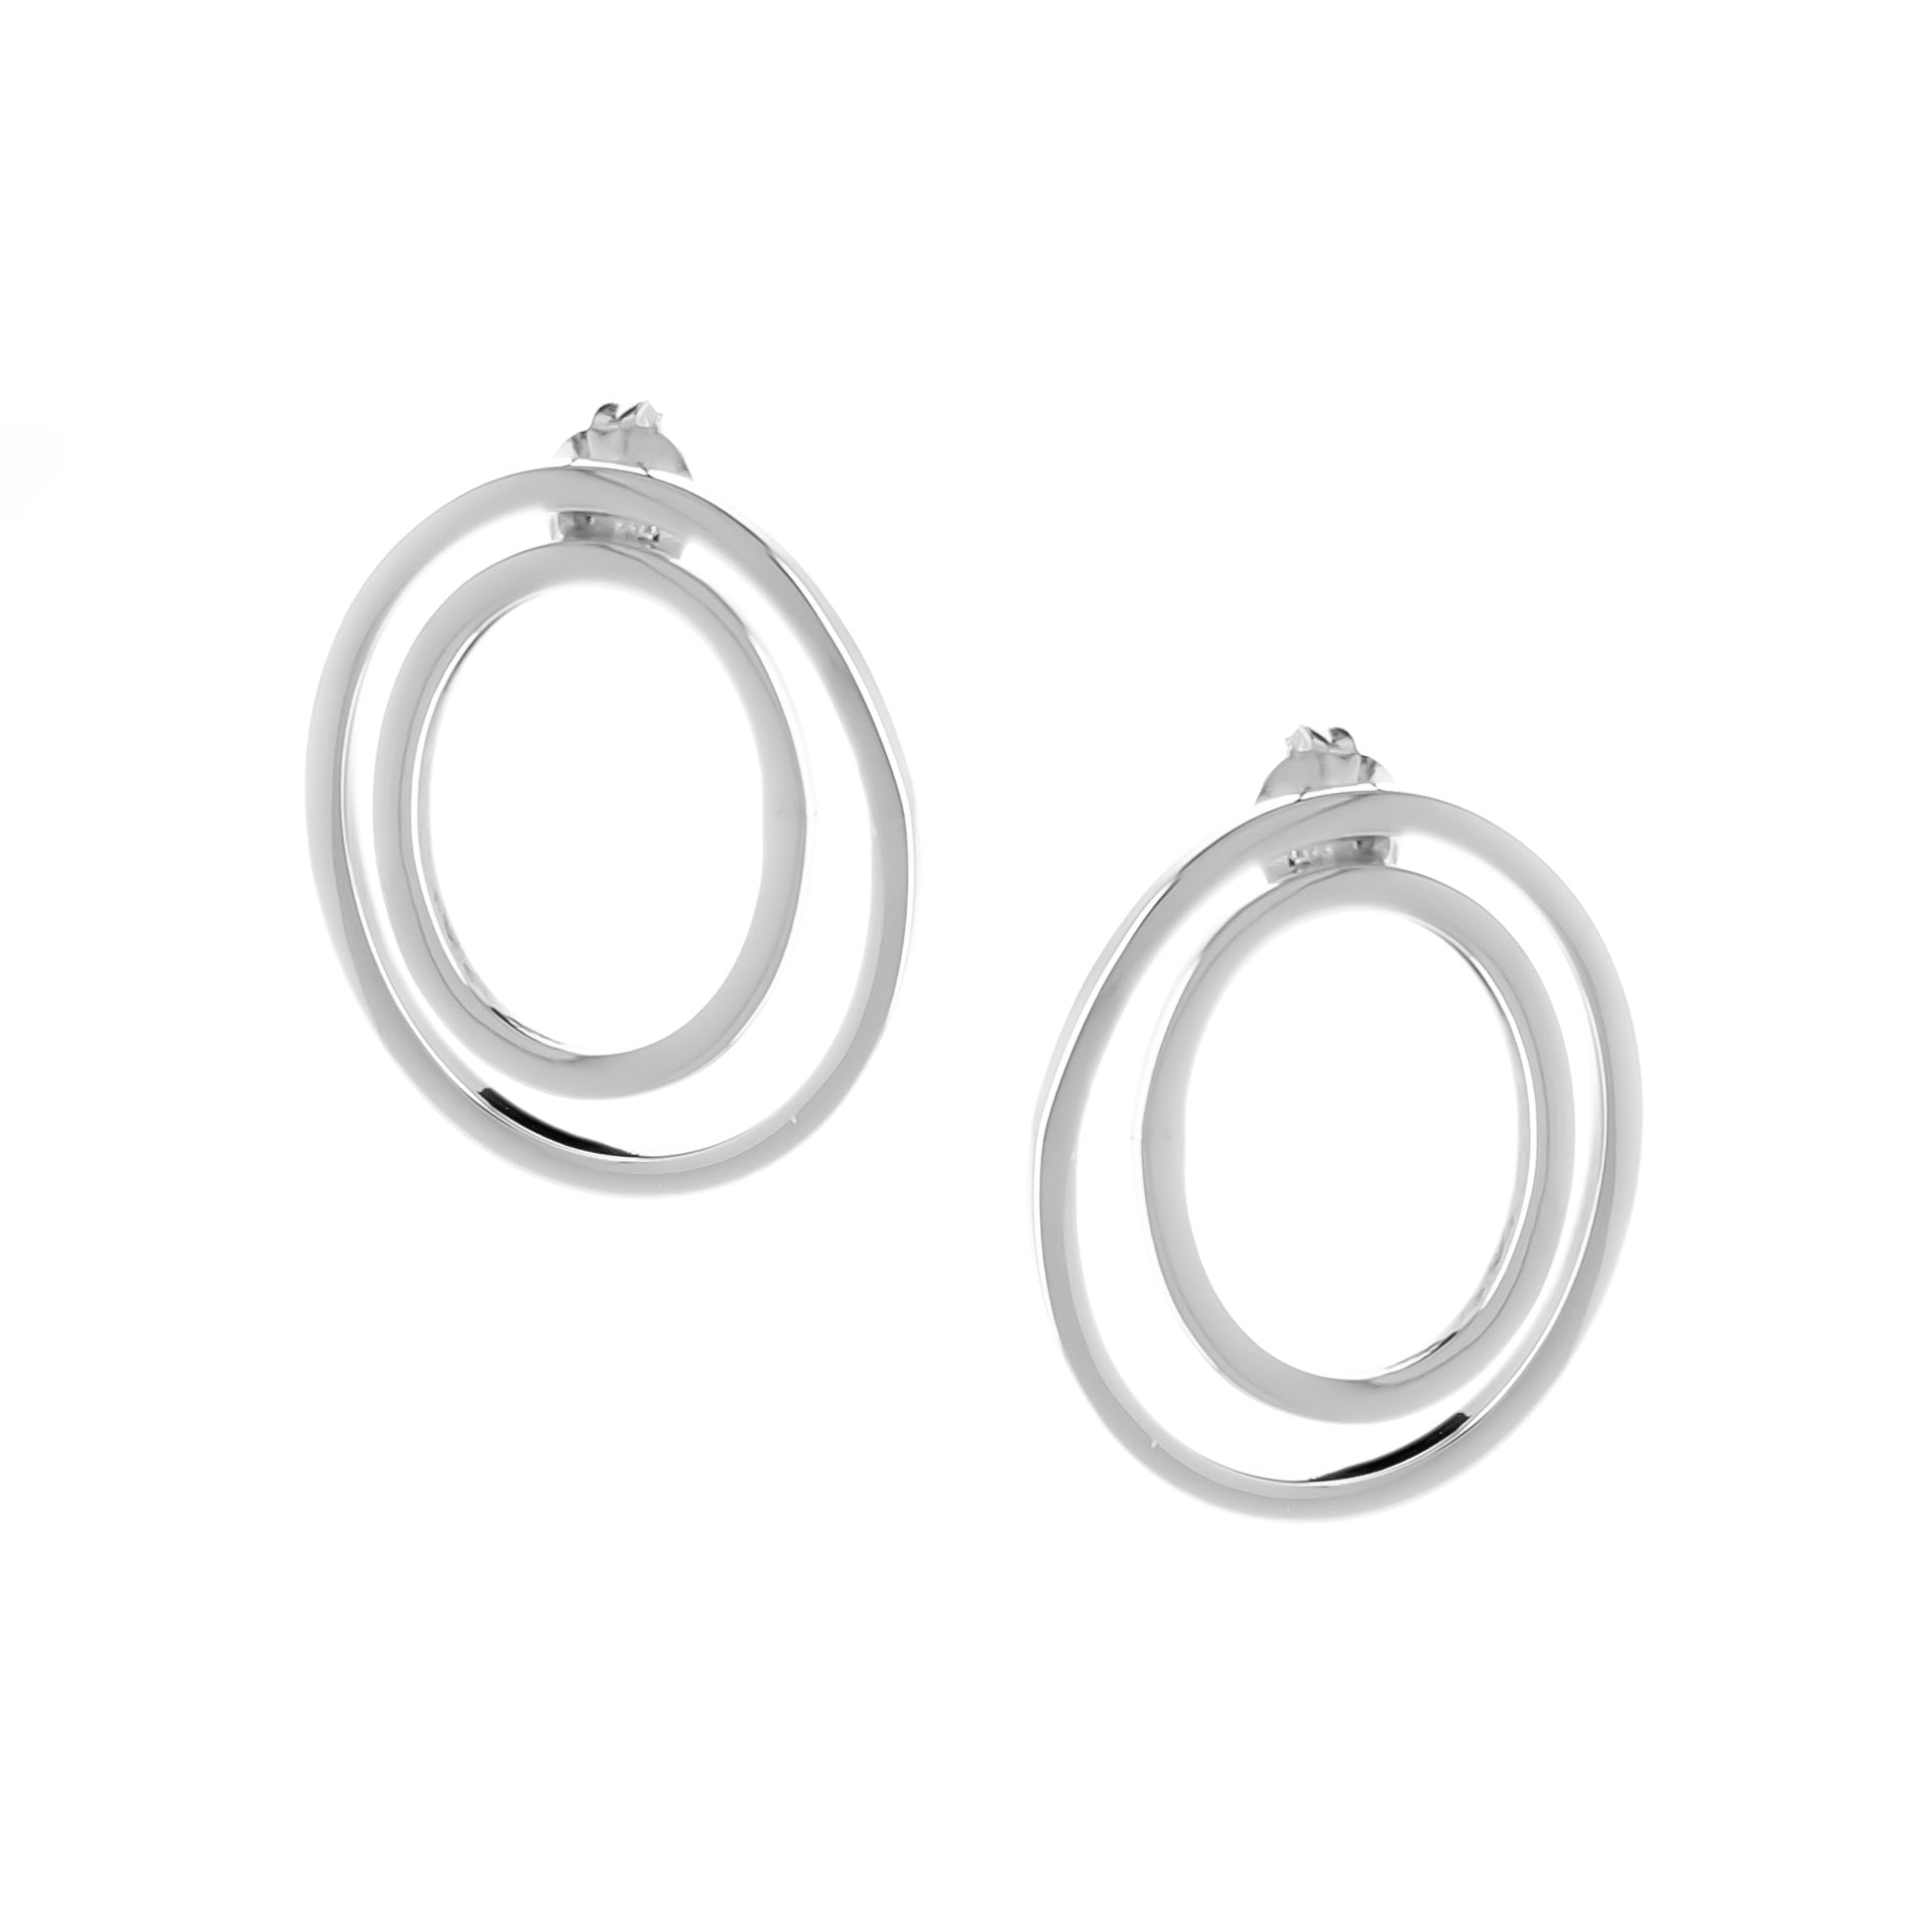 The Concentric Earrings